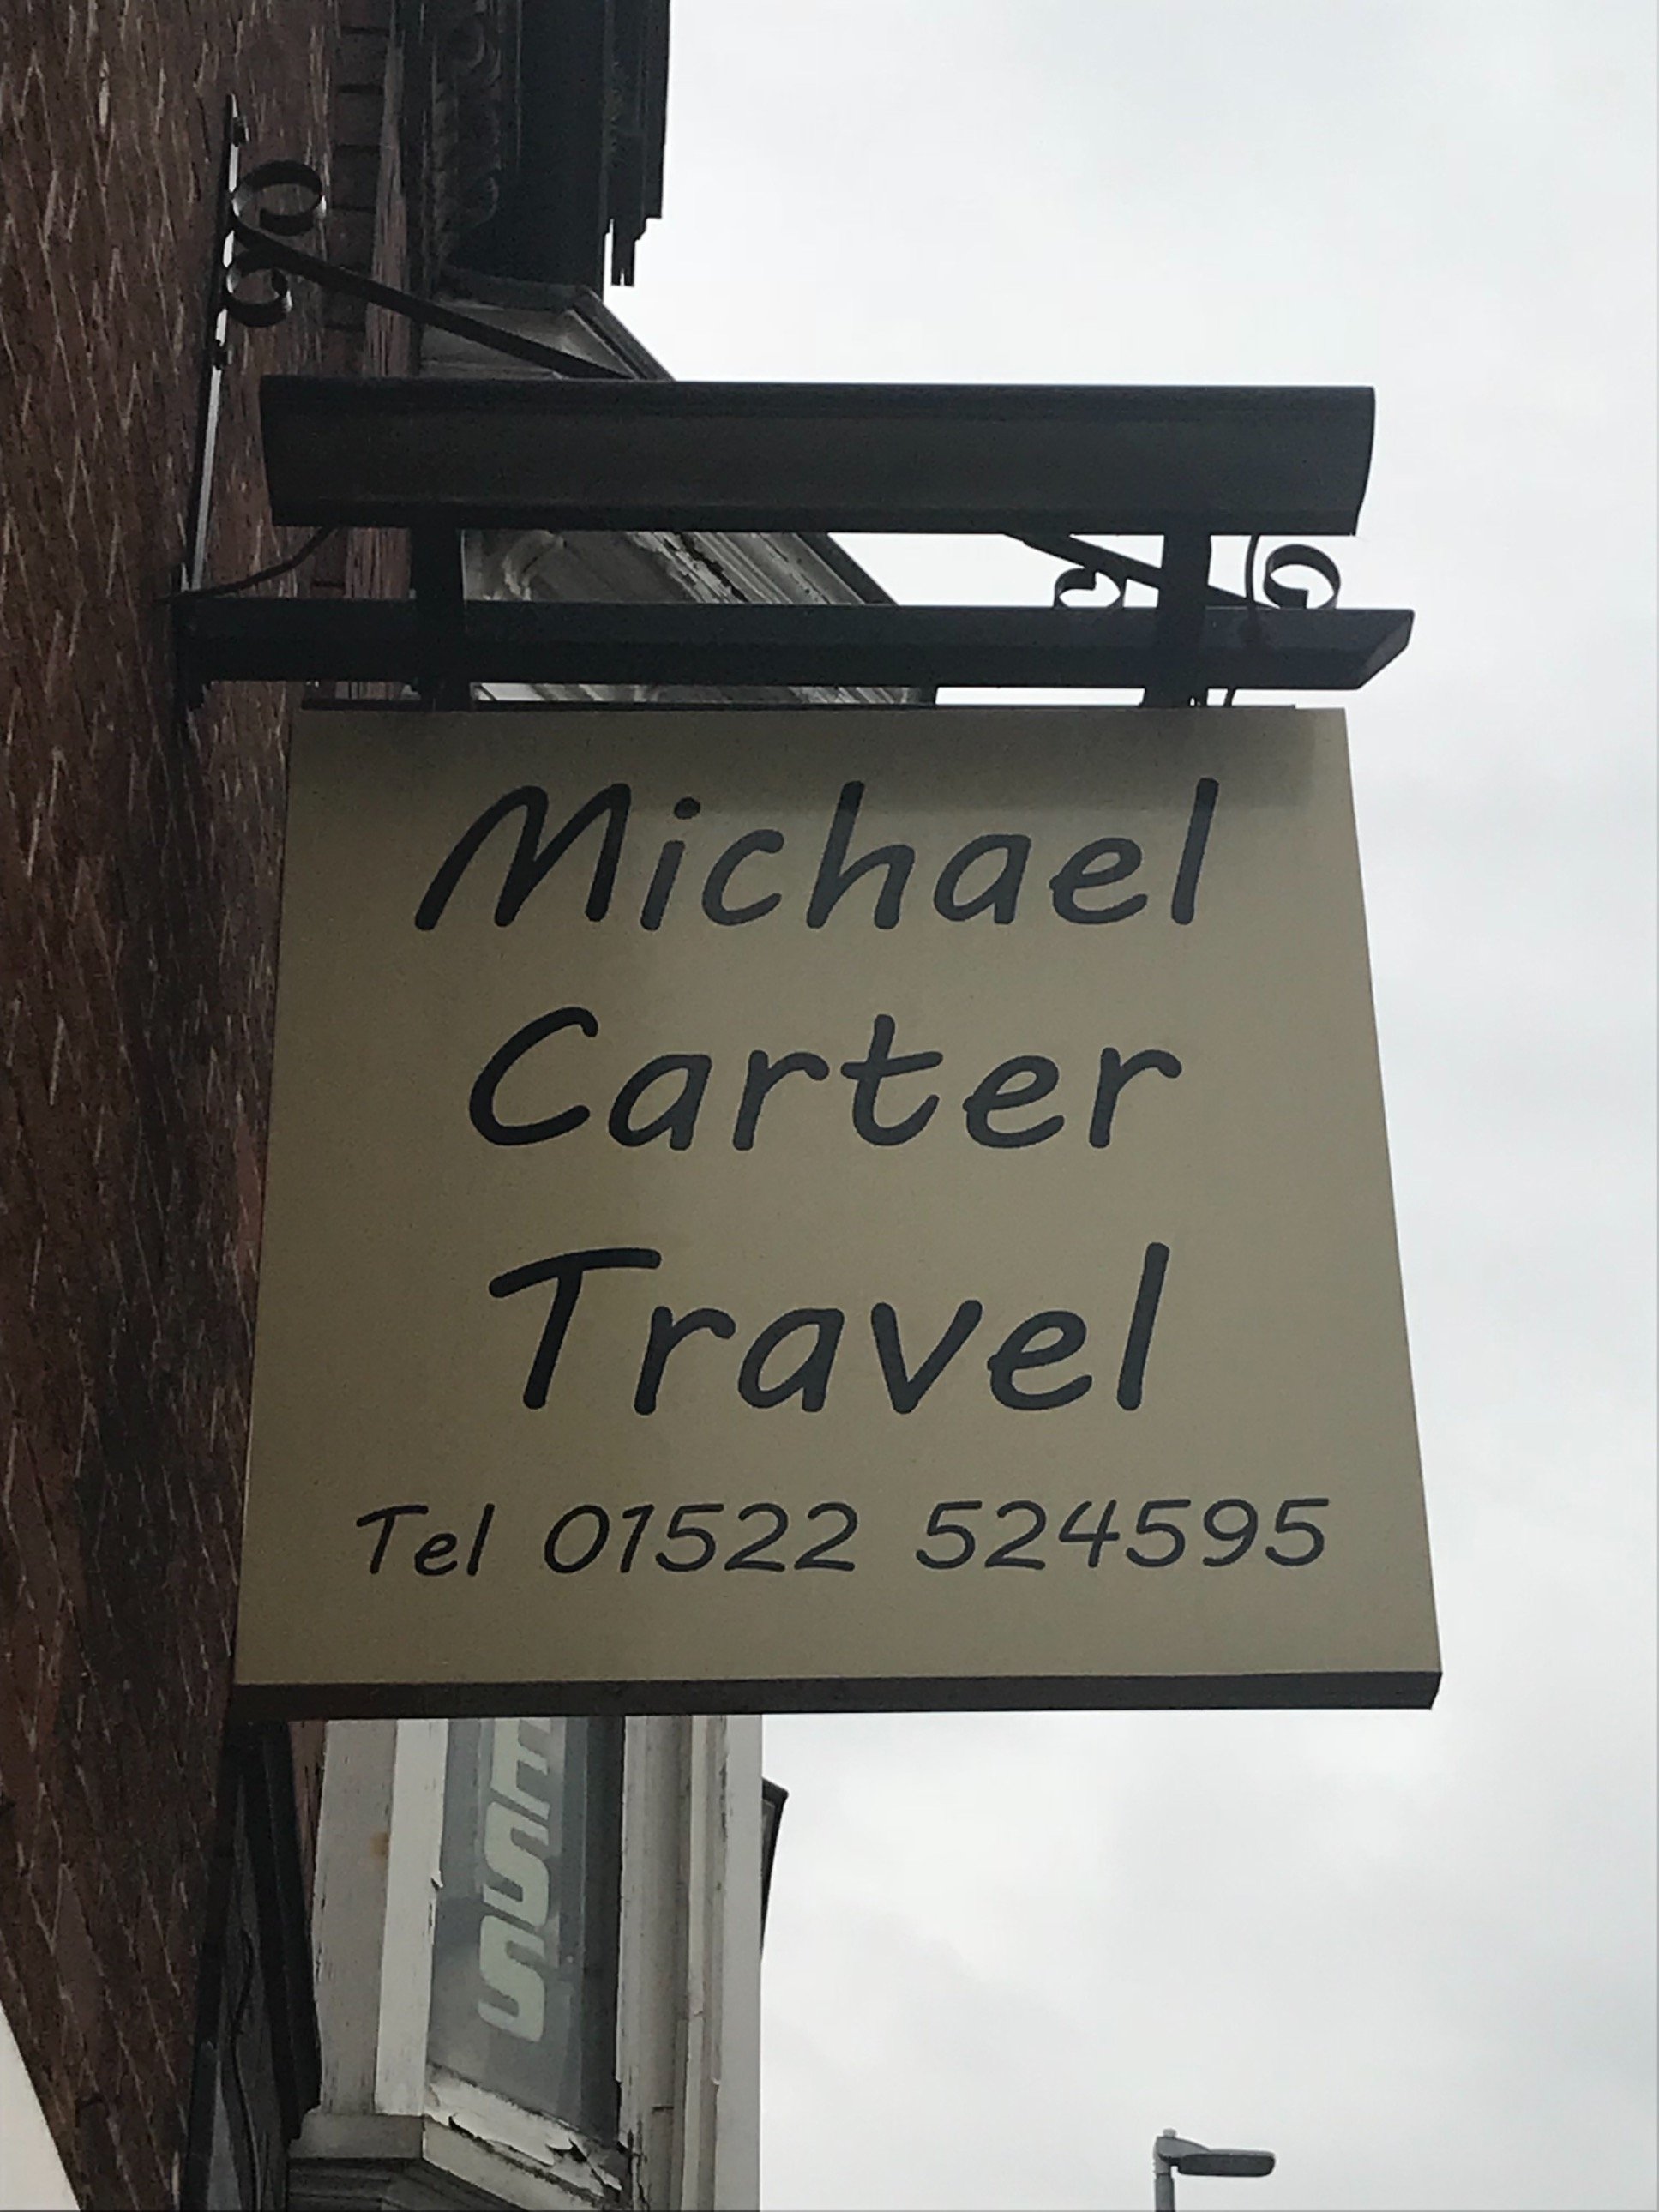 Independent Travel Agency based in Lincoln, UK. Specialising in Tailor Made, Long Haul & Luxury holidays. Give us a call 01522 524595
#Lincoln #Travel #Luxury